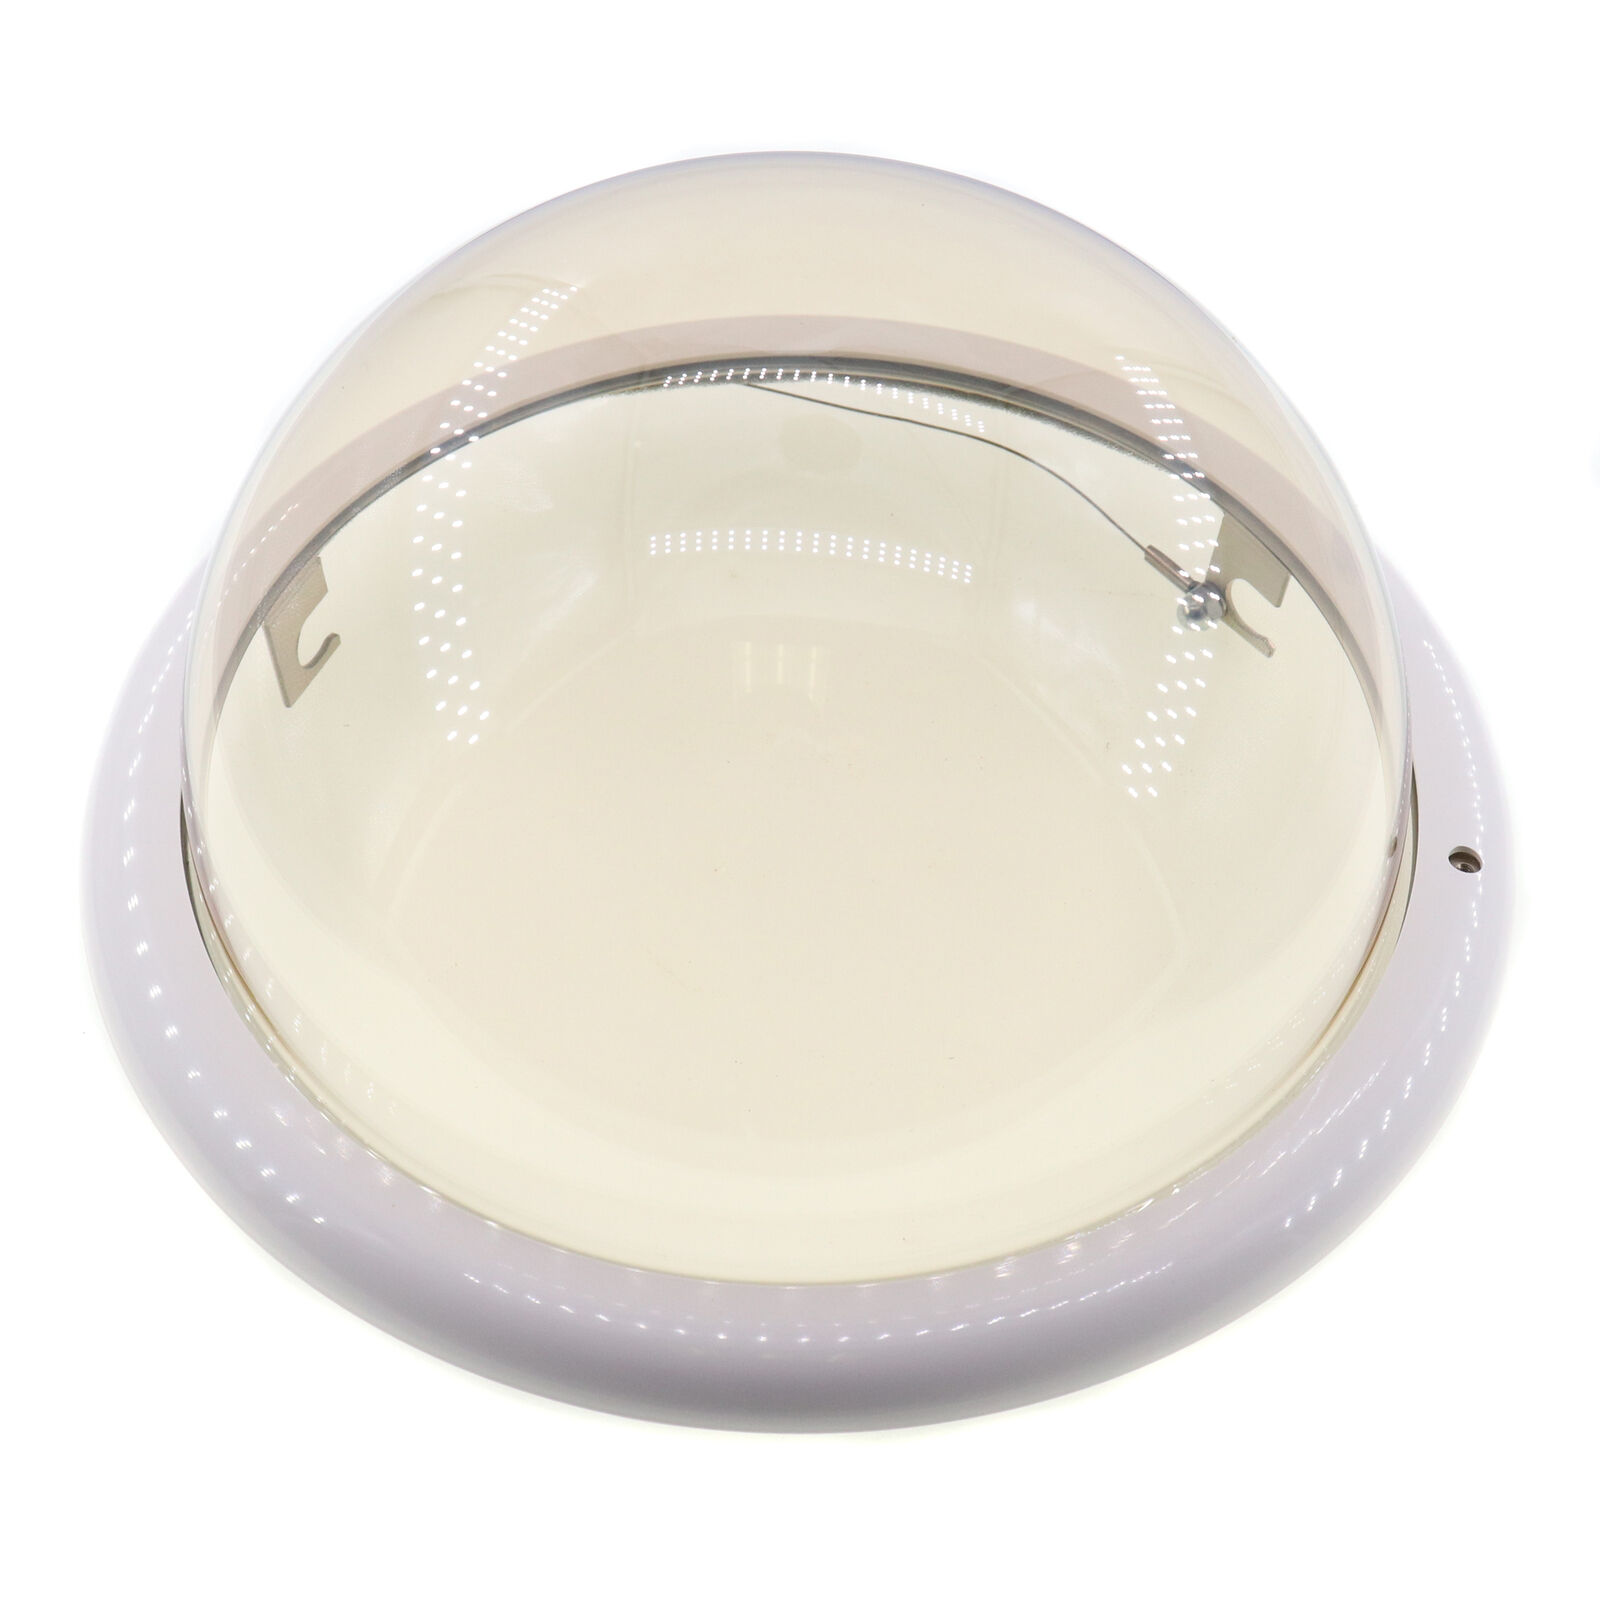 HONEYWELL HDB00D0KW ACUIX LOWER DOME IN-CEILING CAMERA COVER, CHROME, WHITE TRIM